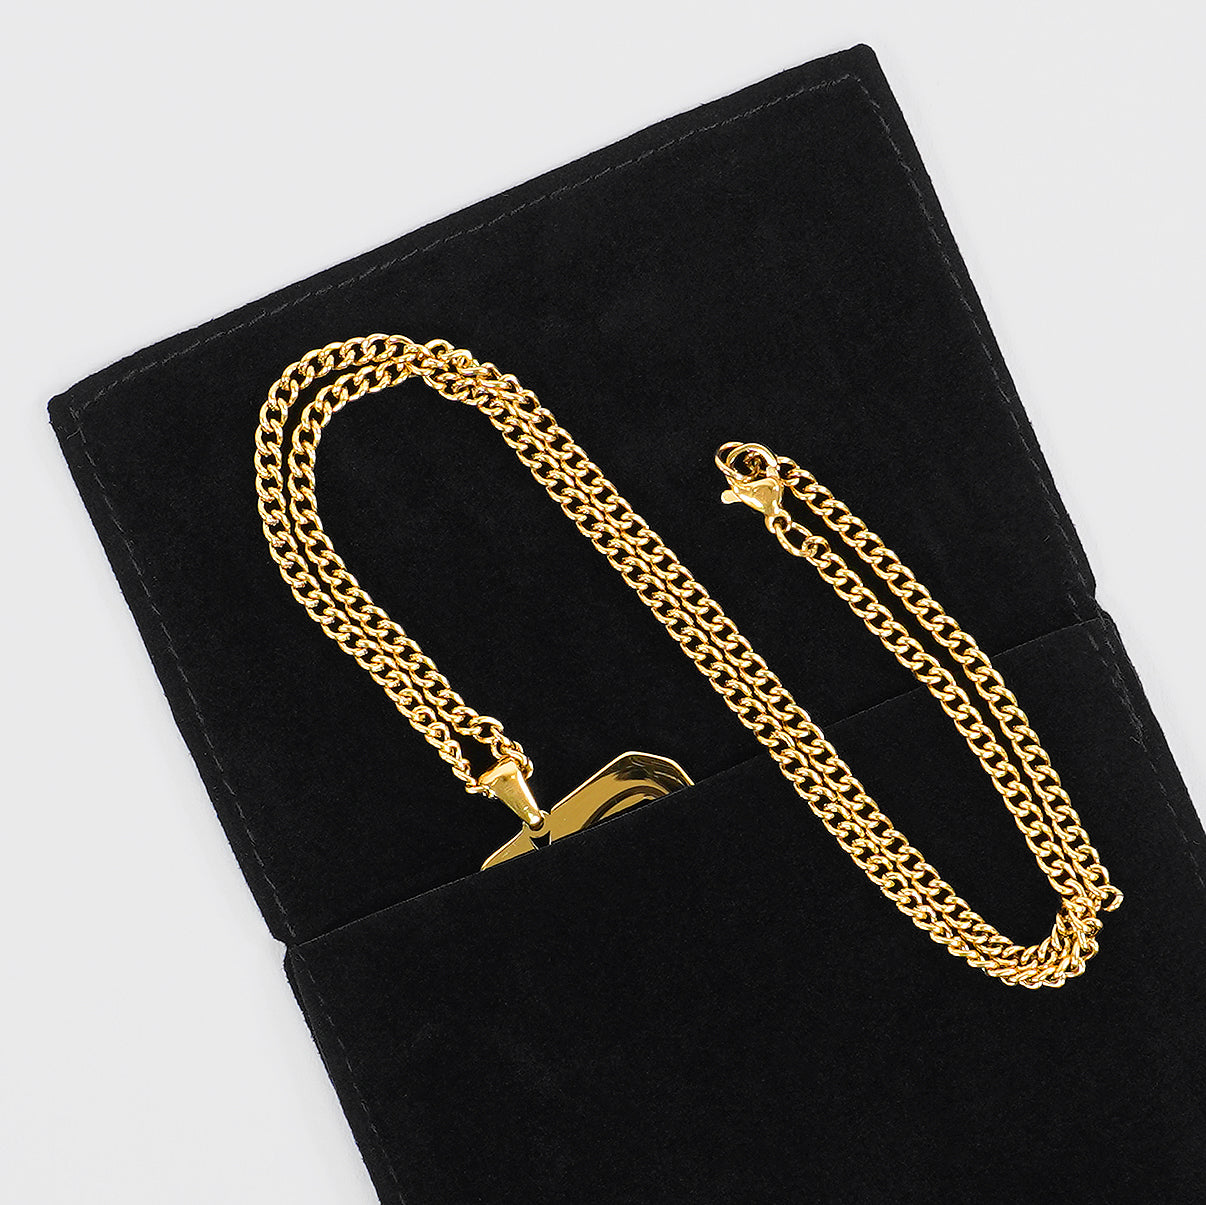 4 Number Pendant with Chain Necklace - Gold Plated Stainless Steel